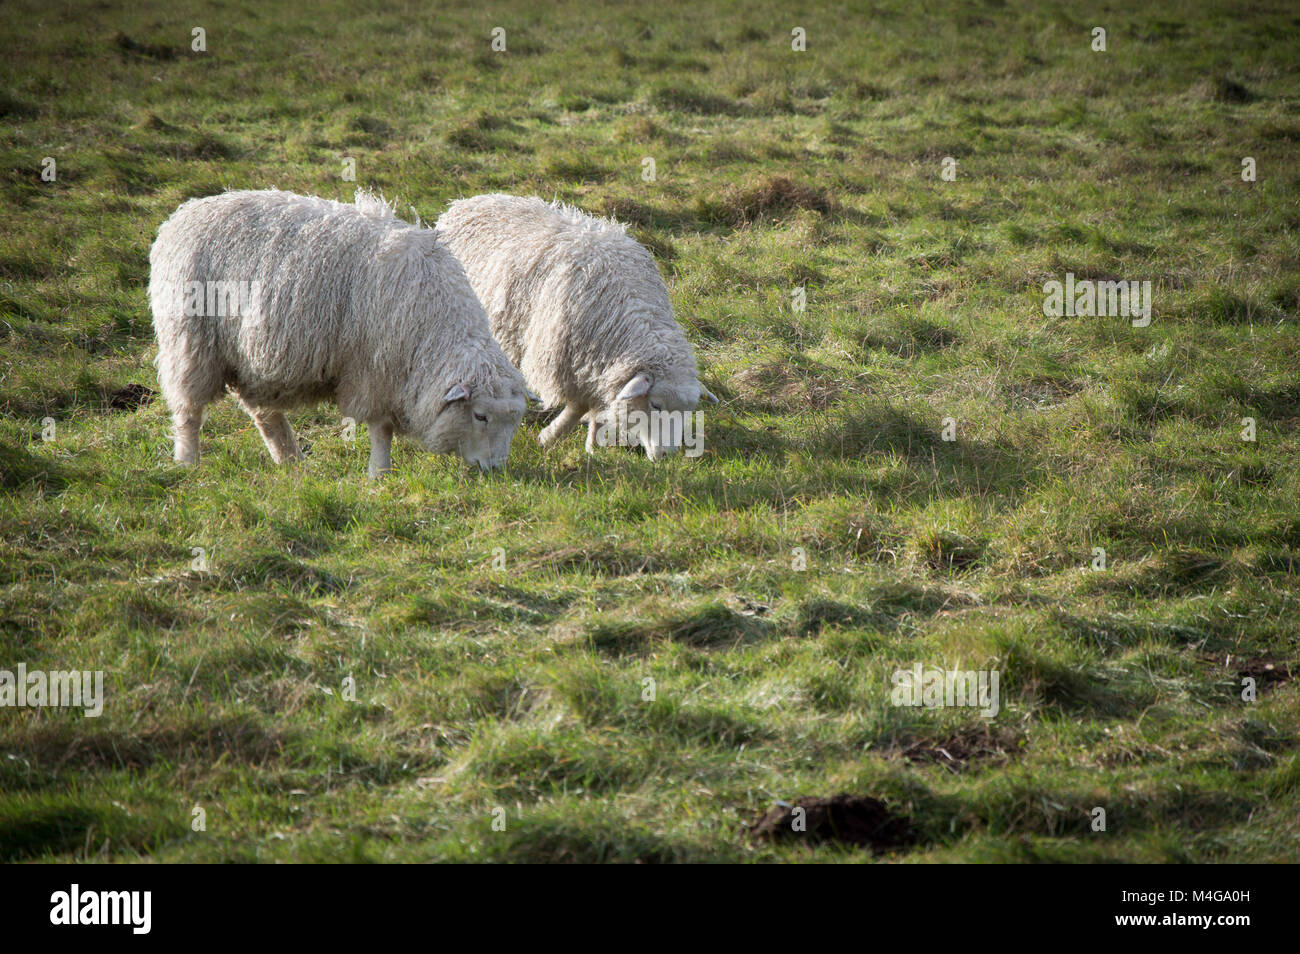 Sheeps eating grass in Amesbury, Wiltshire, England Stock Photo